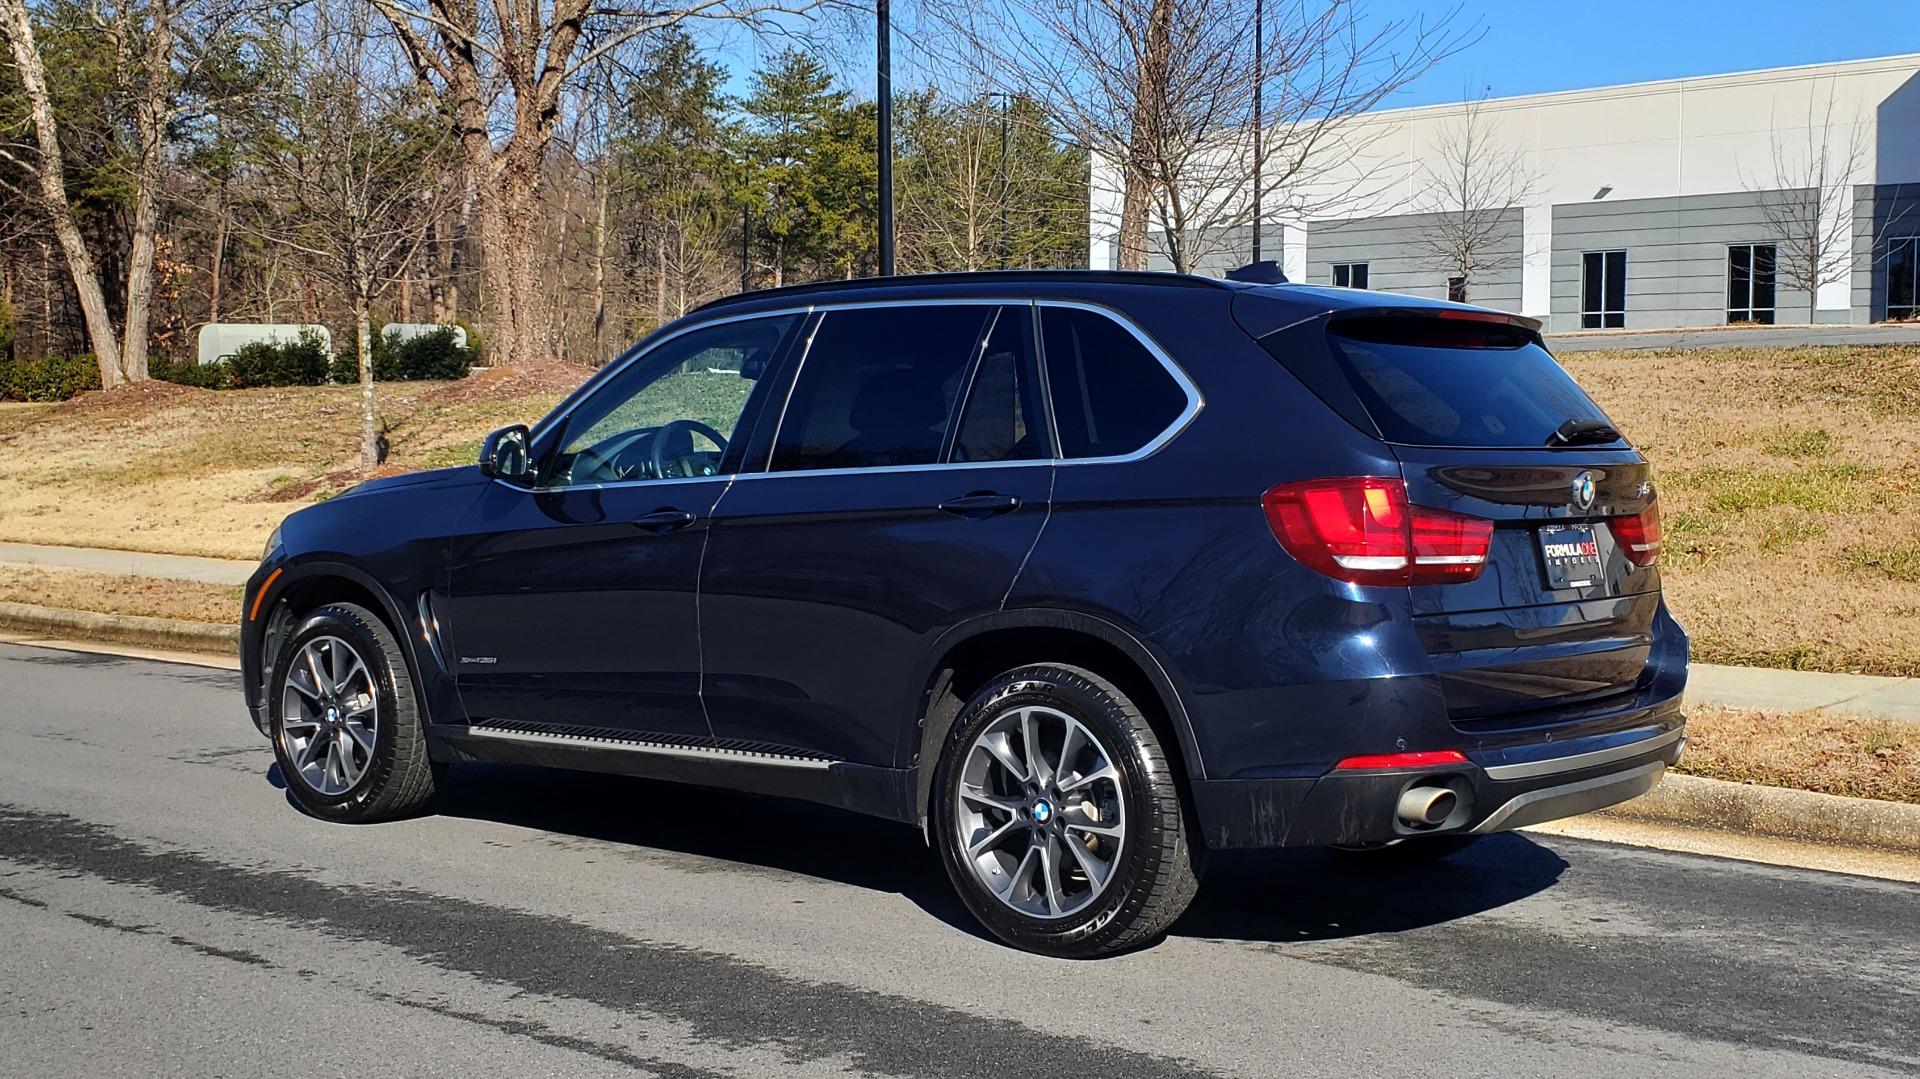 Used 2015 BMW X5 XDRIVE35I PREMIUM / NAV / XLINE / CLD WTHR / DRVR ASST / REARVIEW for sale Sold at Formula Imports in Charlotte NC 28227 4